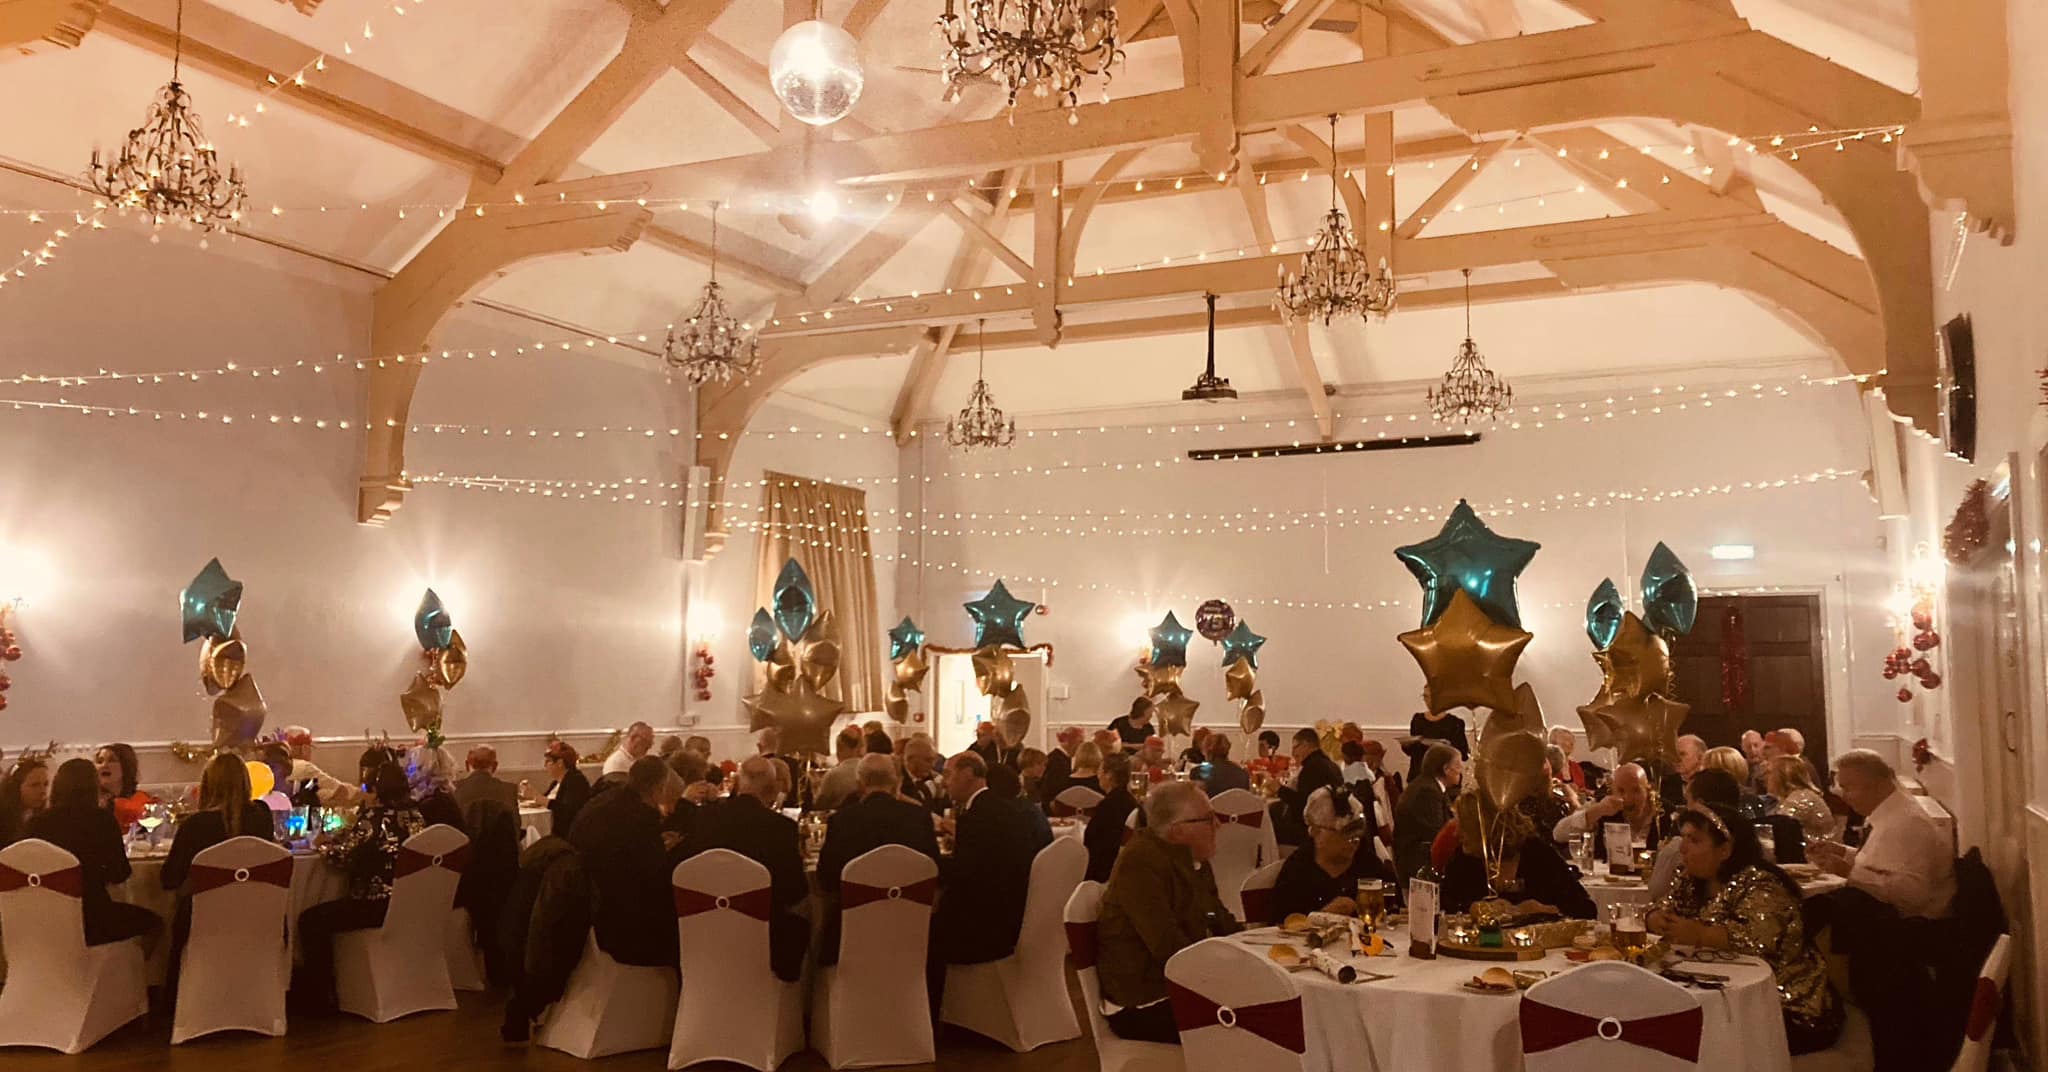 This image shows balloon decor at Rainford Village Hall supplied by SJ's Leisure